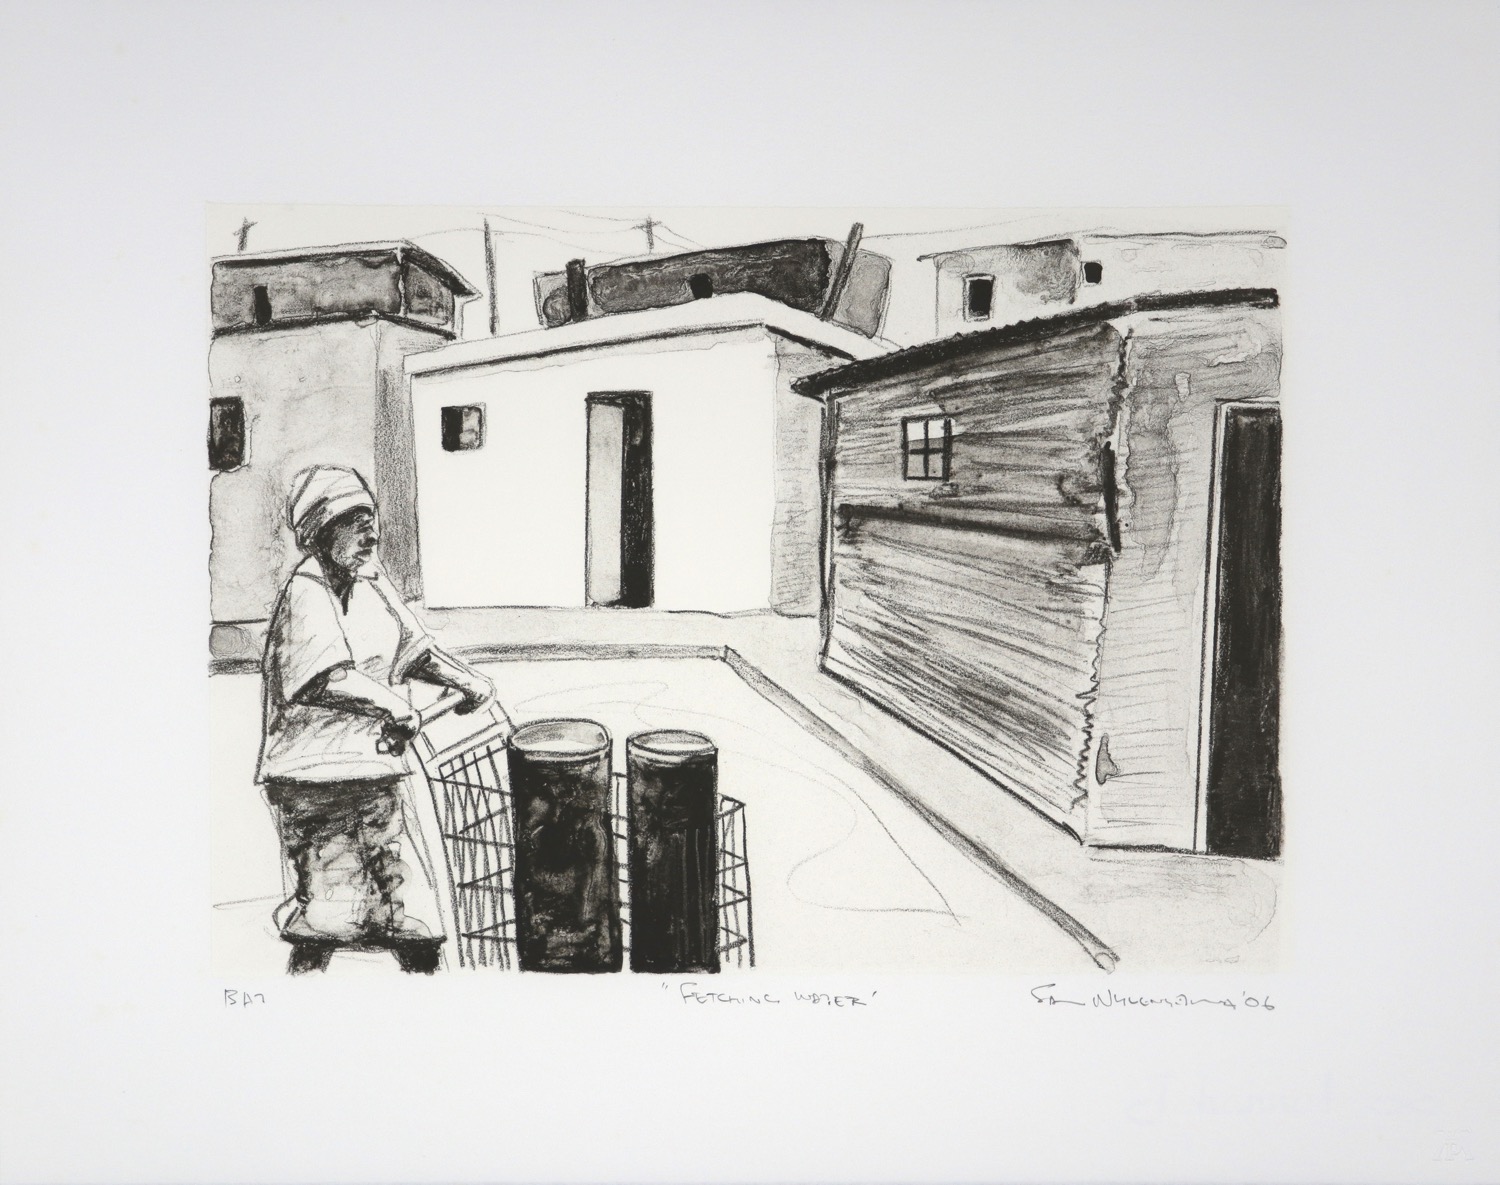 Monochrome lithograph of a woman with trolley fetching water in a South African township